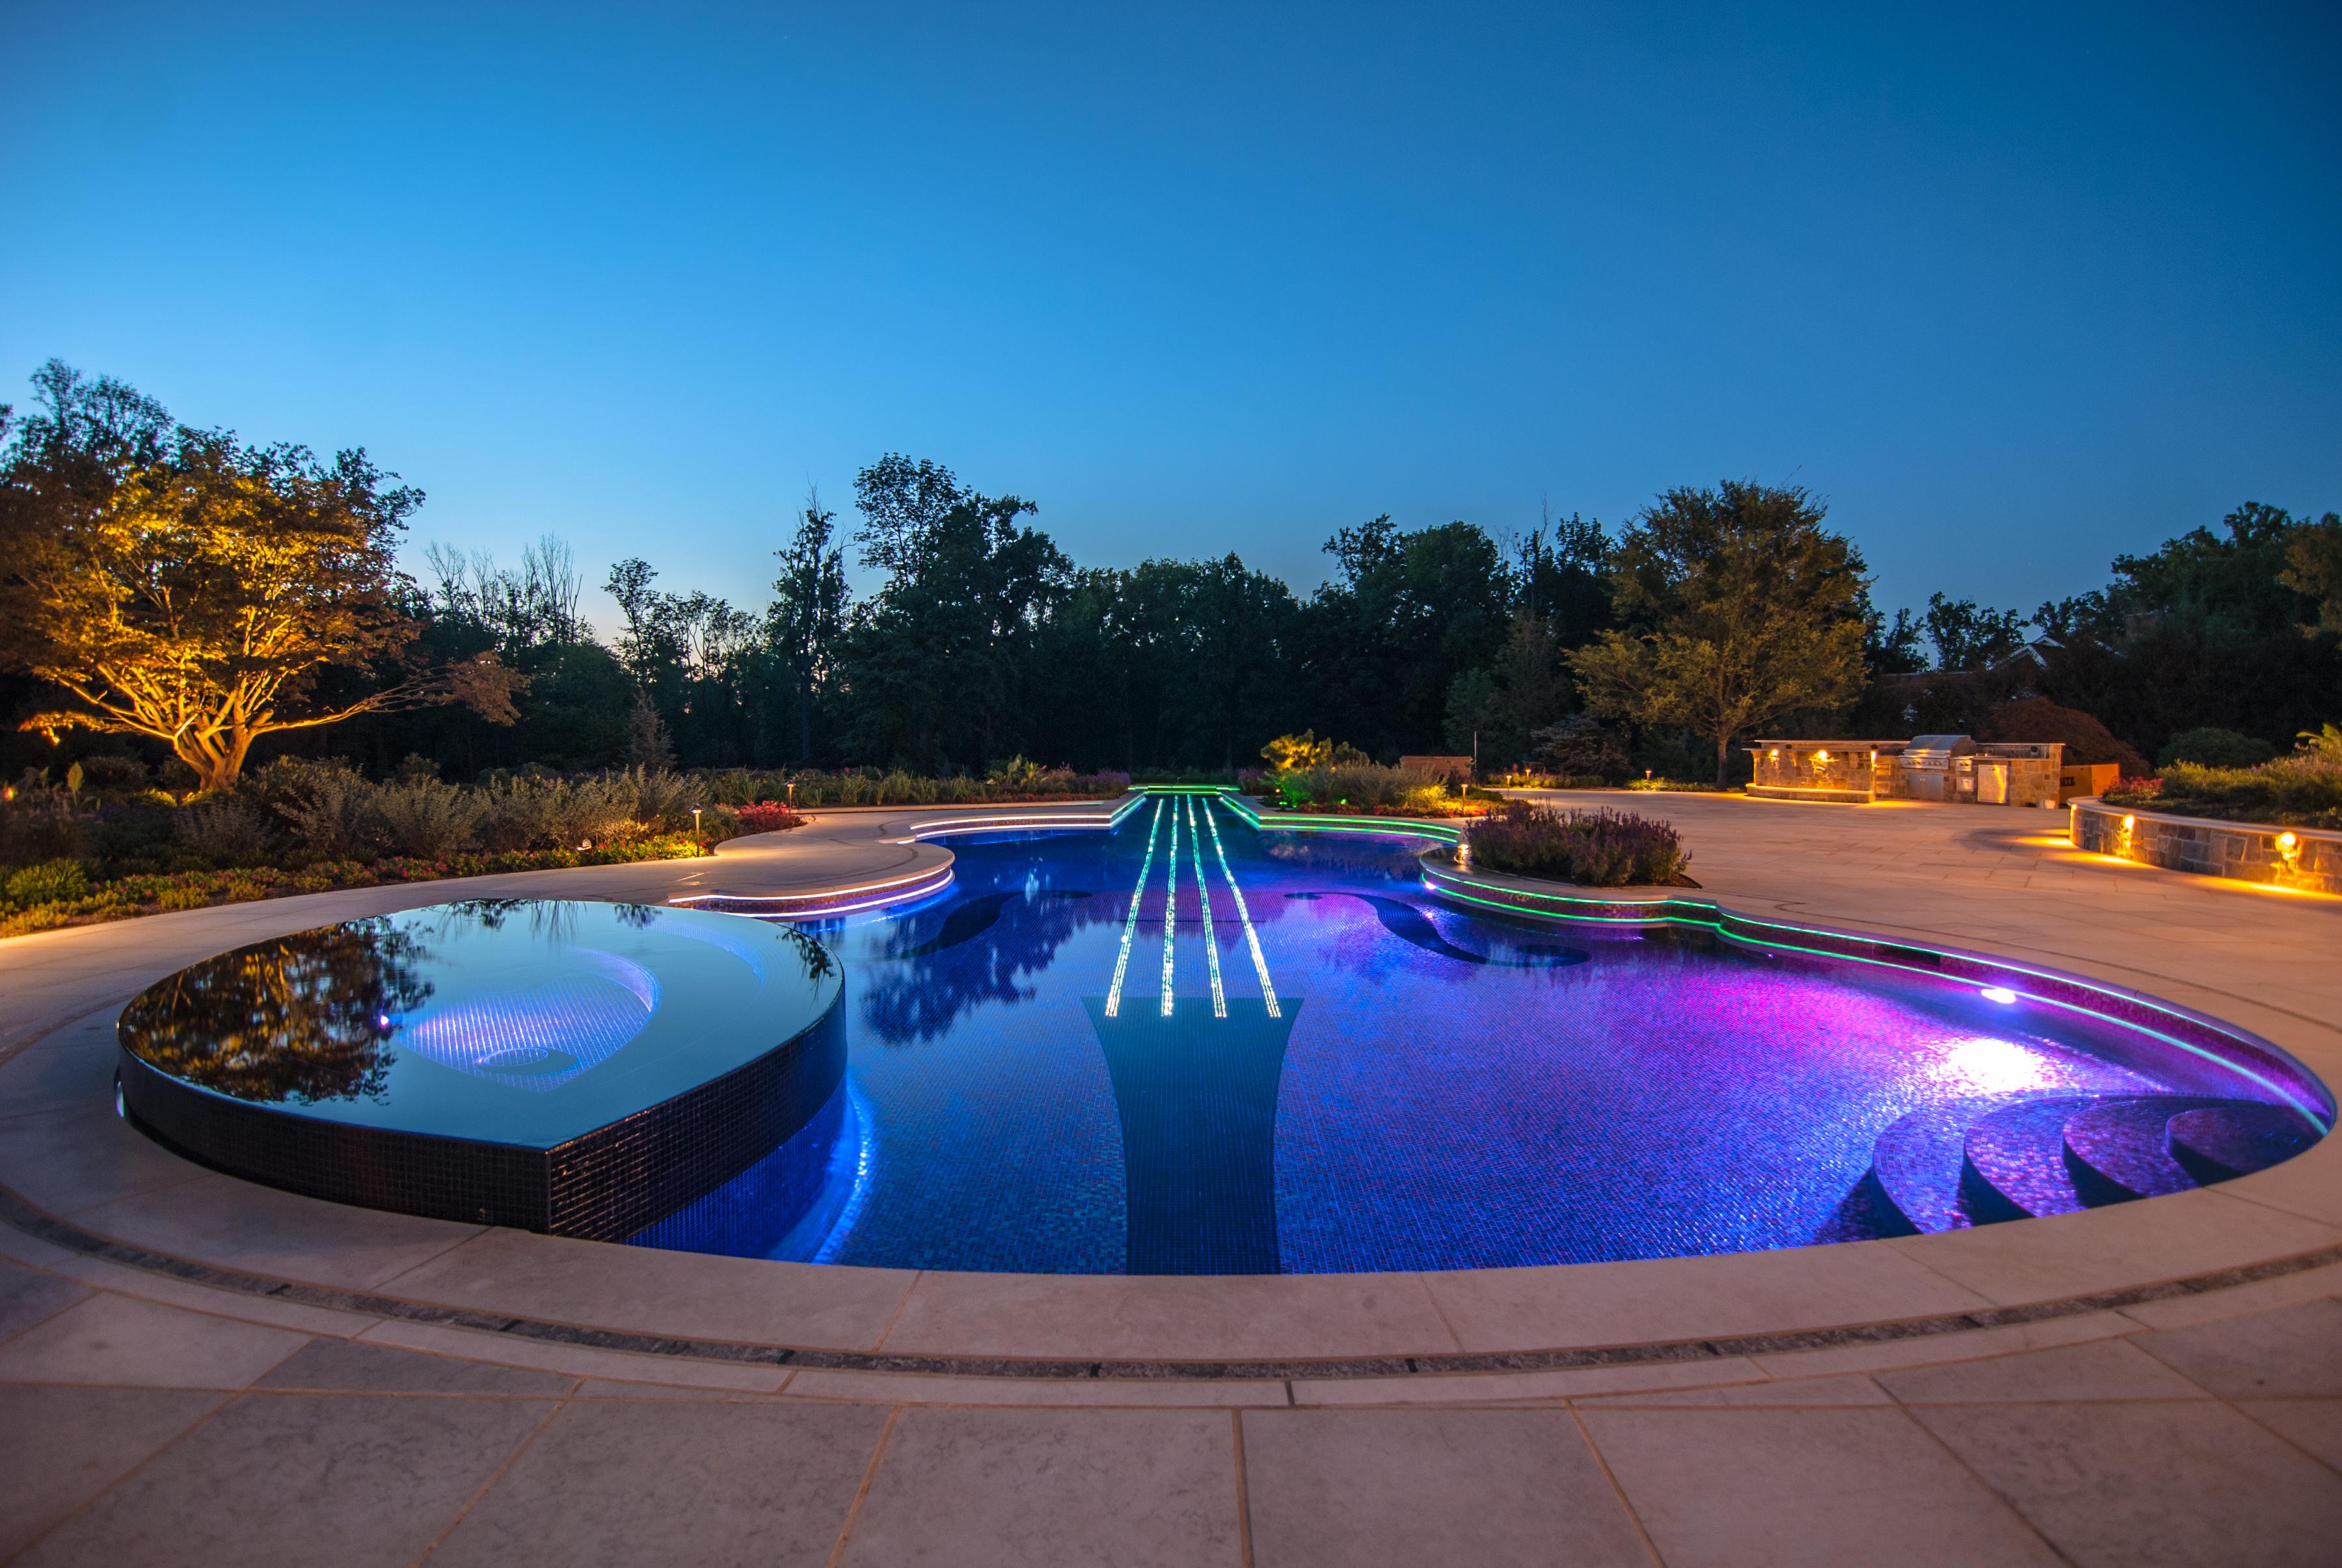 westchester-county-ny-inground-swimming-pool-wins-2013-best-design